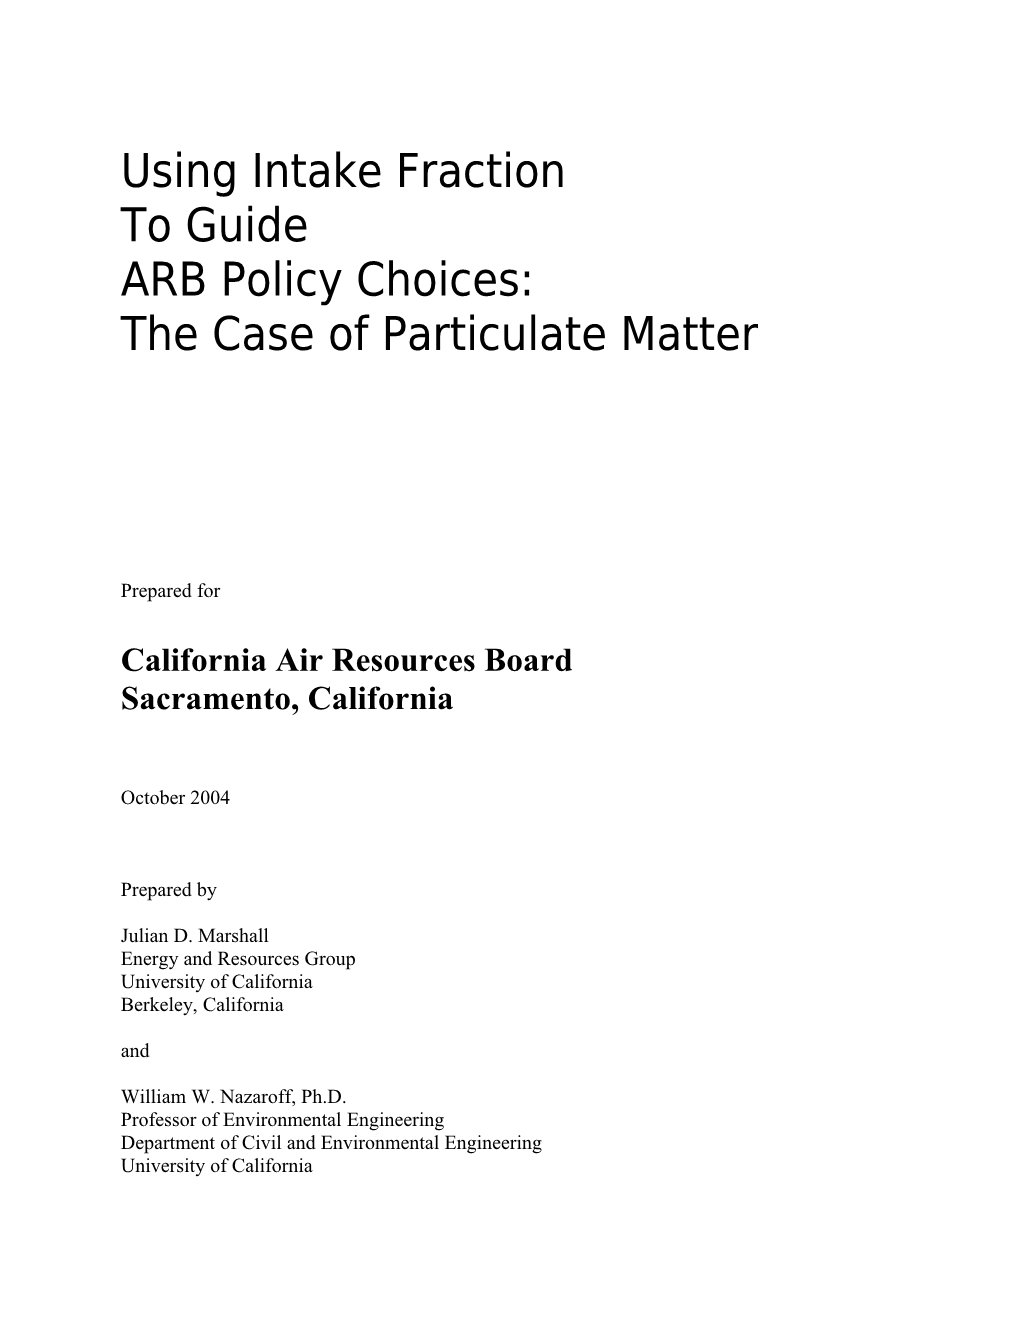 Below Is an Outline for a Report to Scott Fruin (ARB) by Julian Marshall (UC Berkeley)